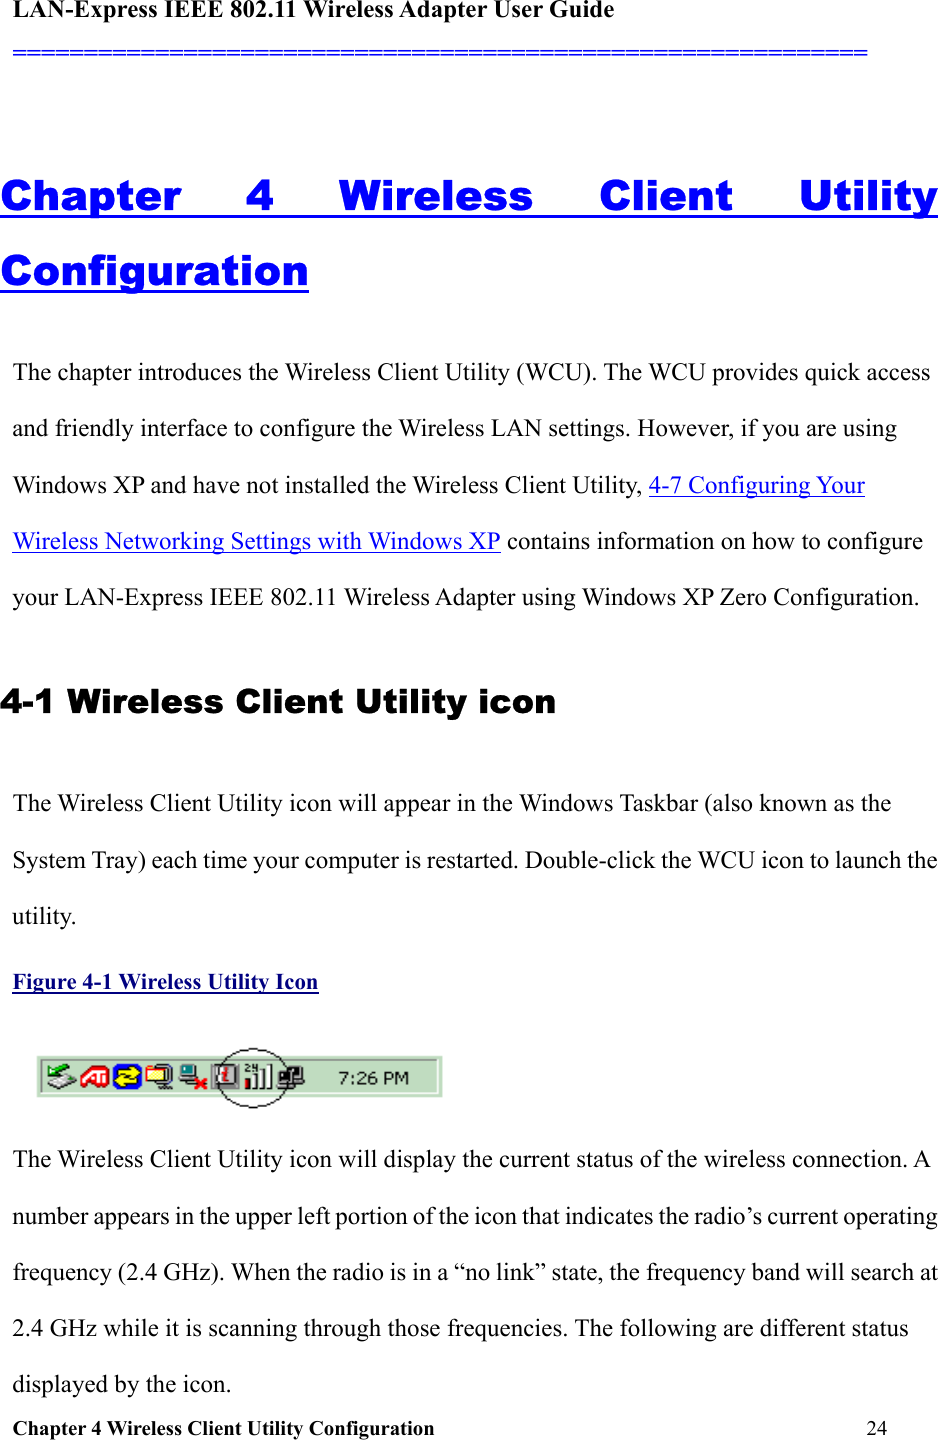 LAN-Express IEEE 802.11 Wireless Adapter User Guide ============================================================  Chapter 4 Wireless Client Utility Configuration     24                              Chapter 4 Wireless Client Utility Configuration The chapter introduces the Wireless Client Utility (WCU). The WCU provides quick access and friendly interface to configure the Wireless LAN settings. However, if you are using Windows XP and have not installed the Wireless Client Utility, 4-7 Configuring Your Wireless Networking Settings with Windows XP contains information on how to configure your LAN-Express IEEE 802.11 Wireless Adapter using Windows XP Zero Configuration.  4-1 Wireless Client Utility icon  The Wireless Client Utility icon will appear in the Windows Taskbar (also known as the System Tray) each time your computer is restarted. Double-click the WCU icon to launch the utility. Figure 4-1 Wireless Utility Icon  The Wireless Client Utility icon will display the current status of the wireless connection. A number appears in the upper left portion of the icon that indicates the radio’s current operating frequency (2.4 GHz). When the radio is in a “no link” state, the frequency band will search at 2.4 GHz while it is scanning through those frequencies. The following are different status displayed by the icon. 